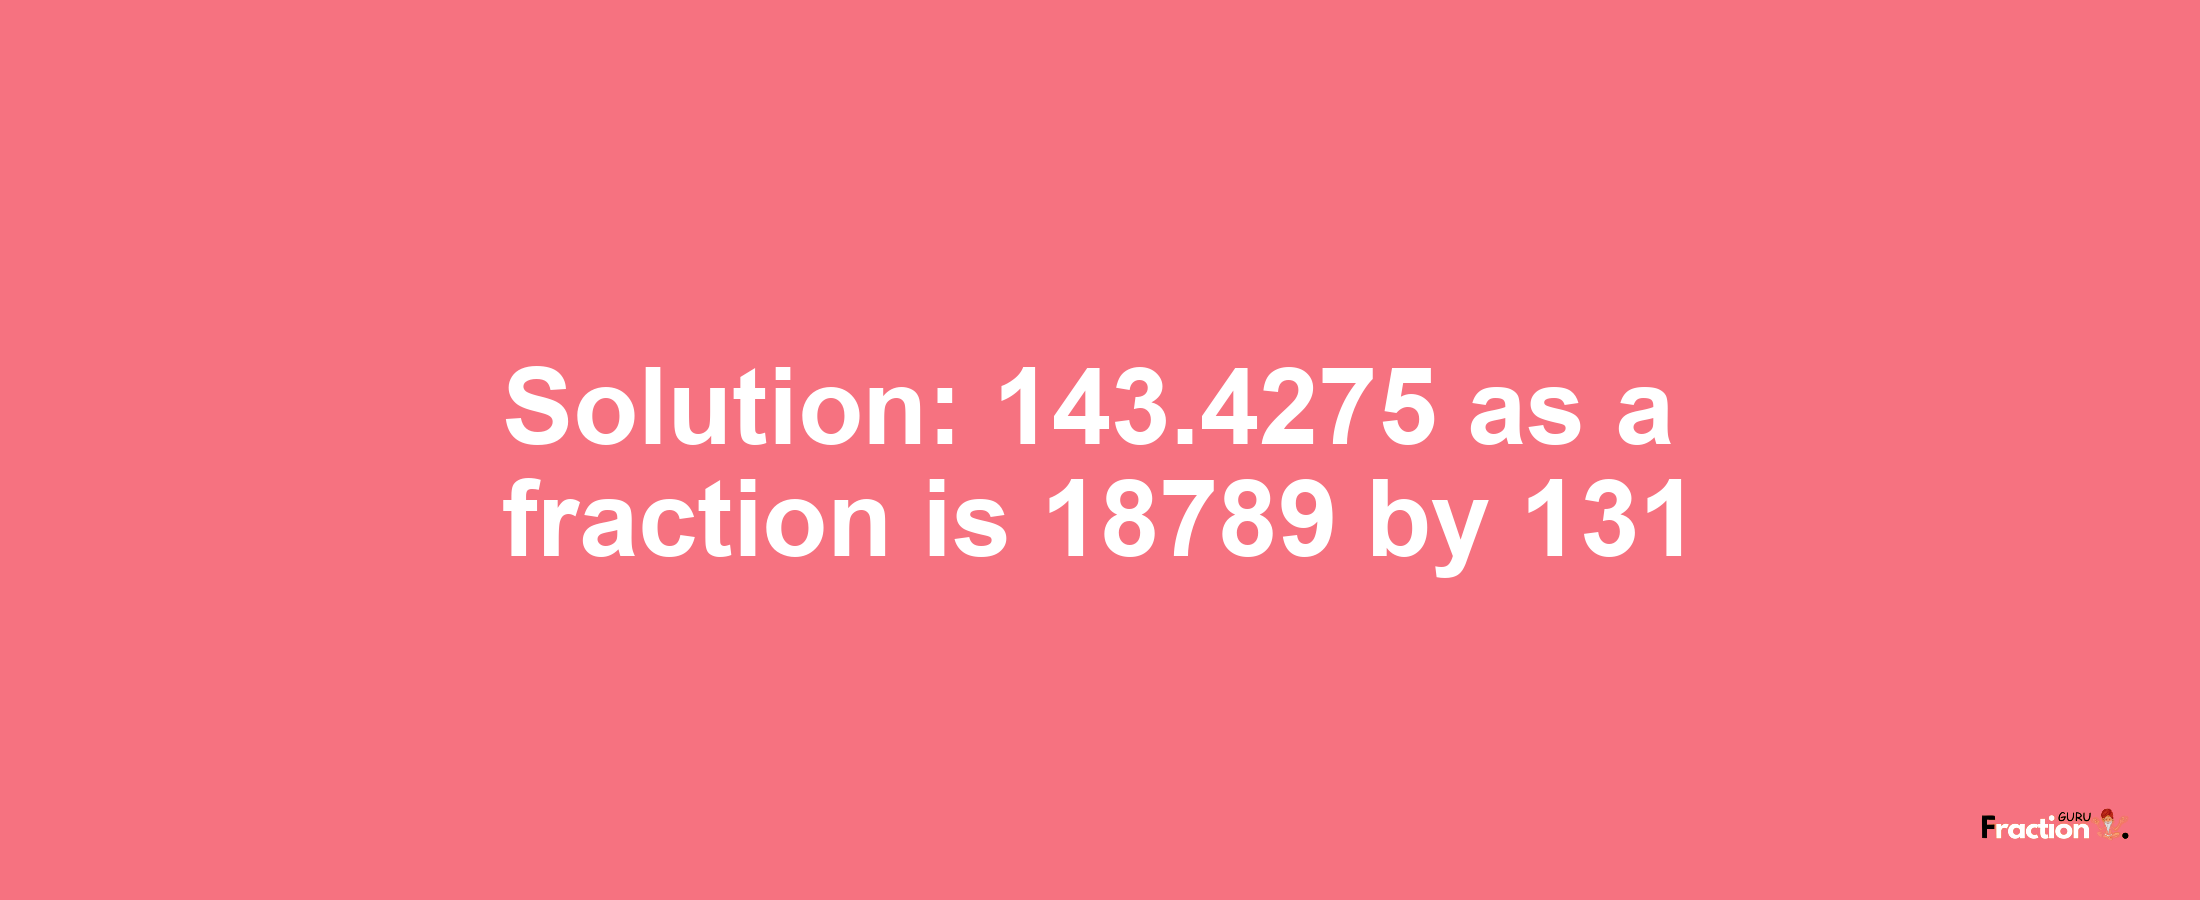 Solution:143.4275 as a fraction is 18789/131